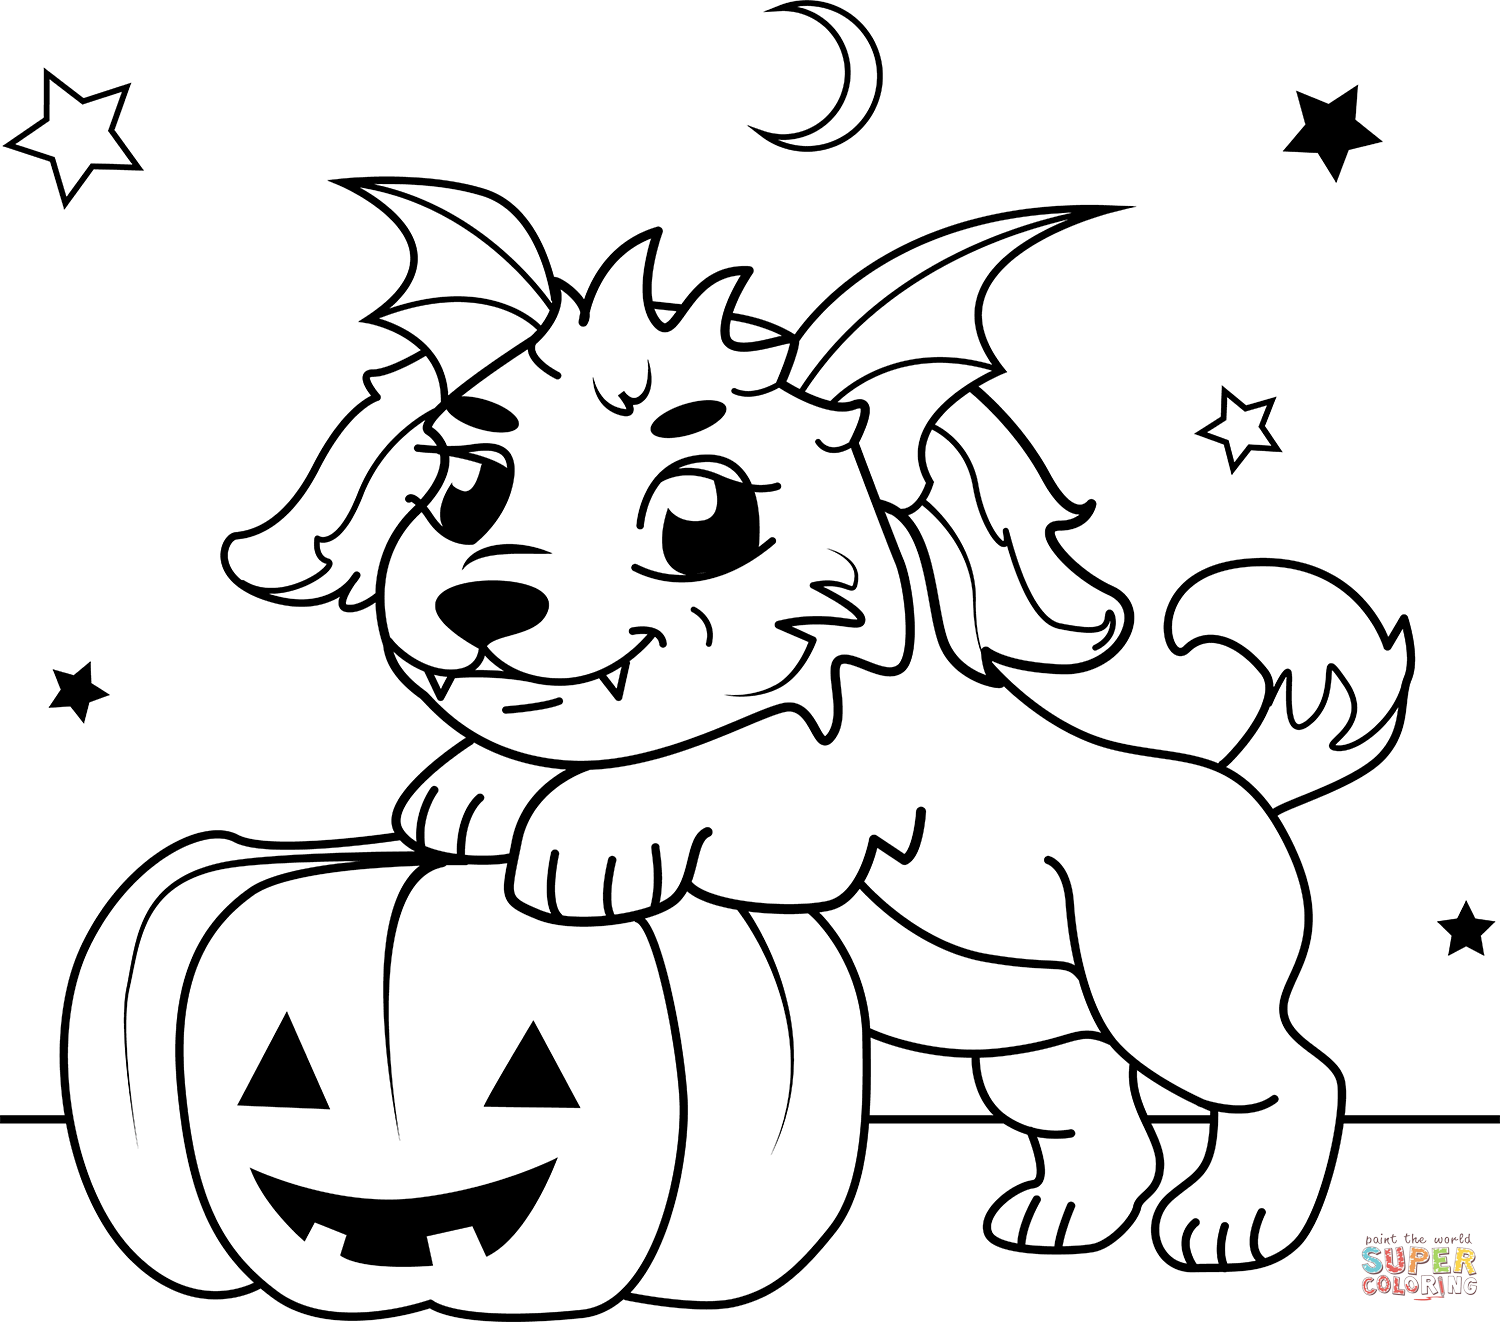 Halloween Puppy coloring page | Free Printable Coloring Pages